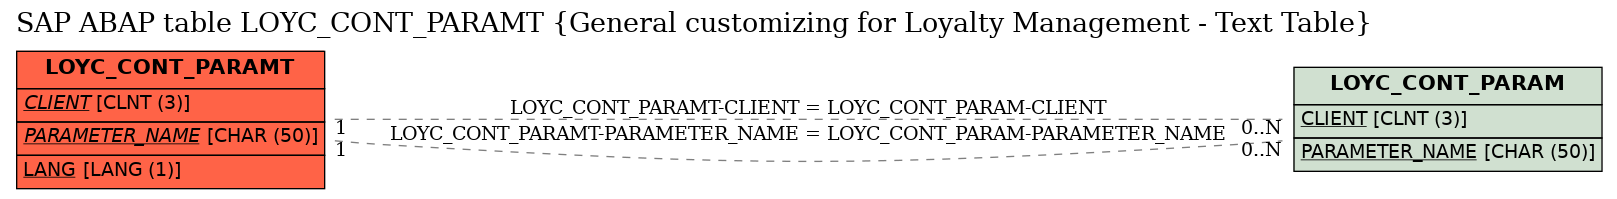 E-R Diagram for table LOYC_CONT_PARAMT (General customizing for Loyalty Management - Text Table)